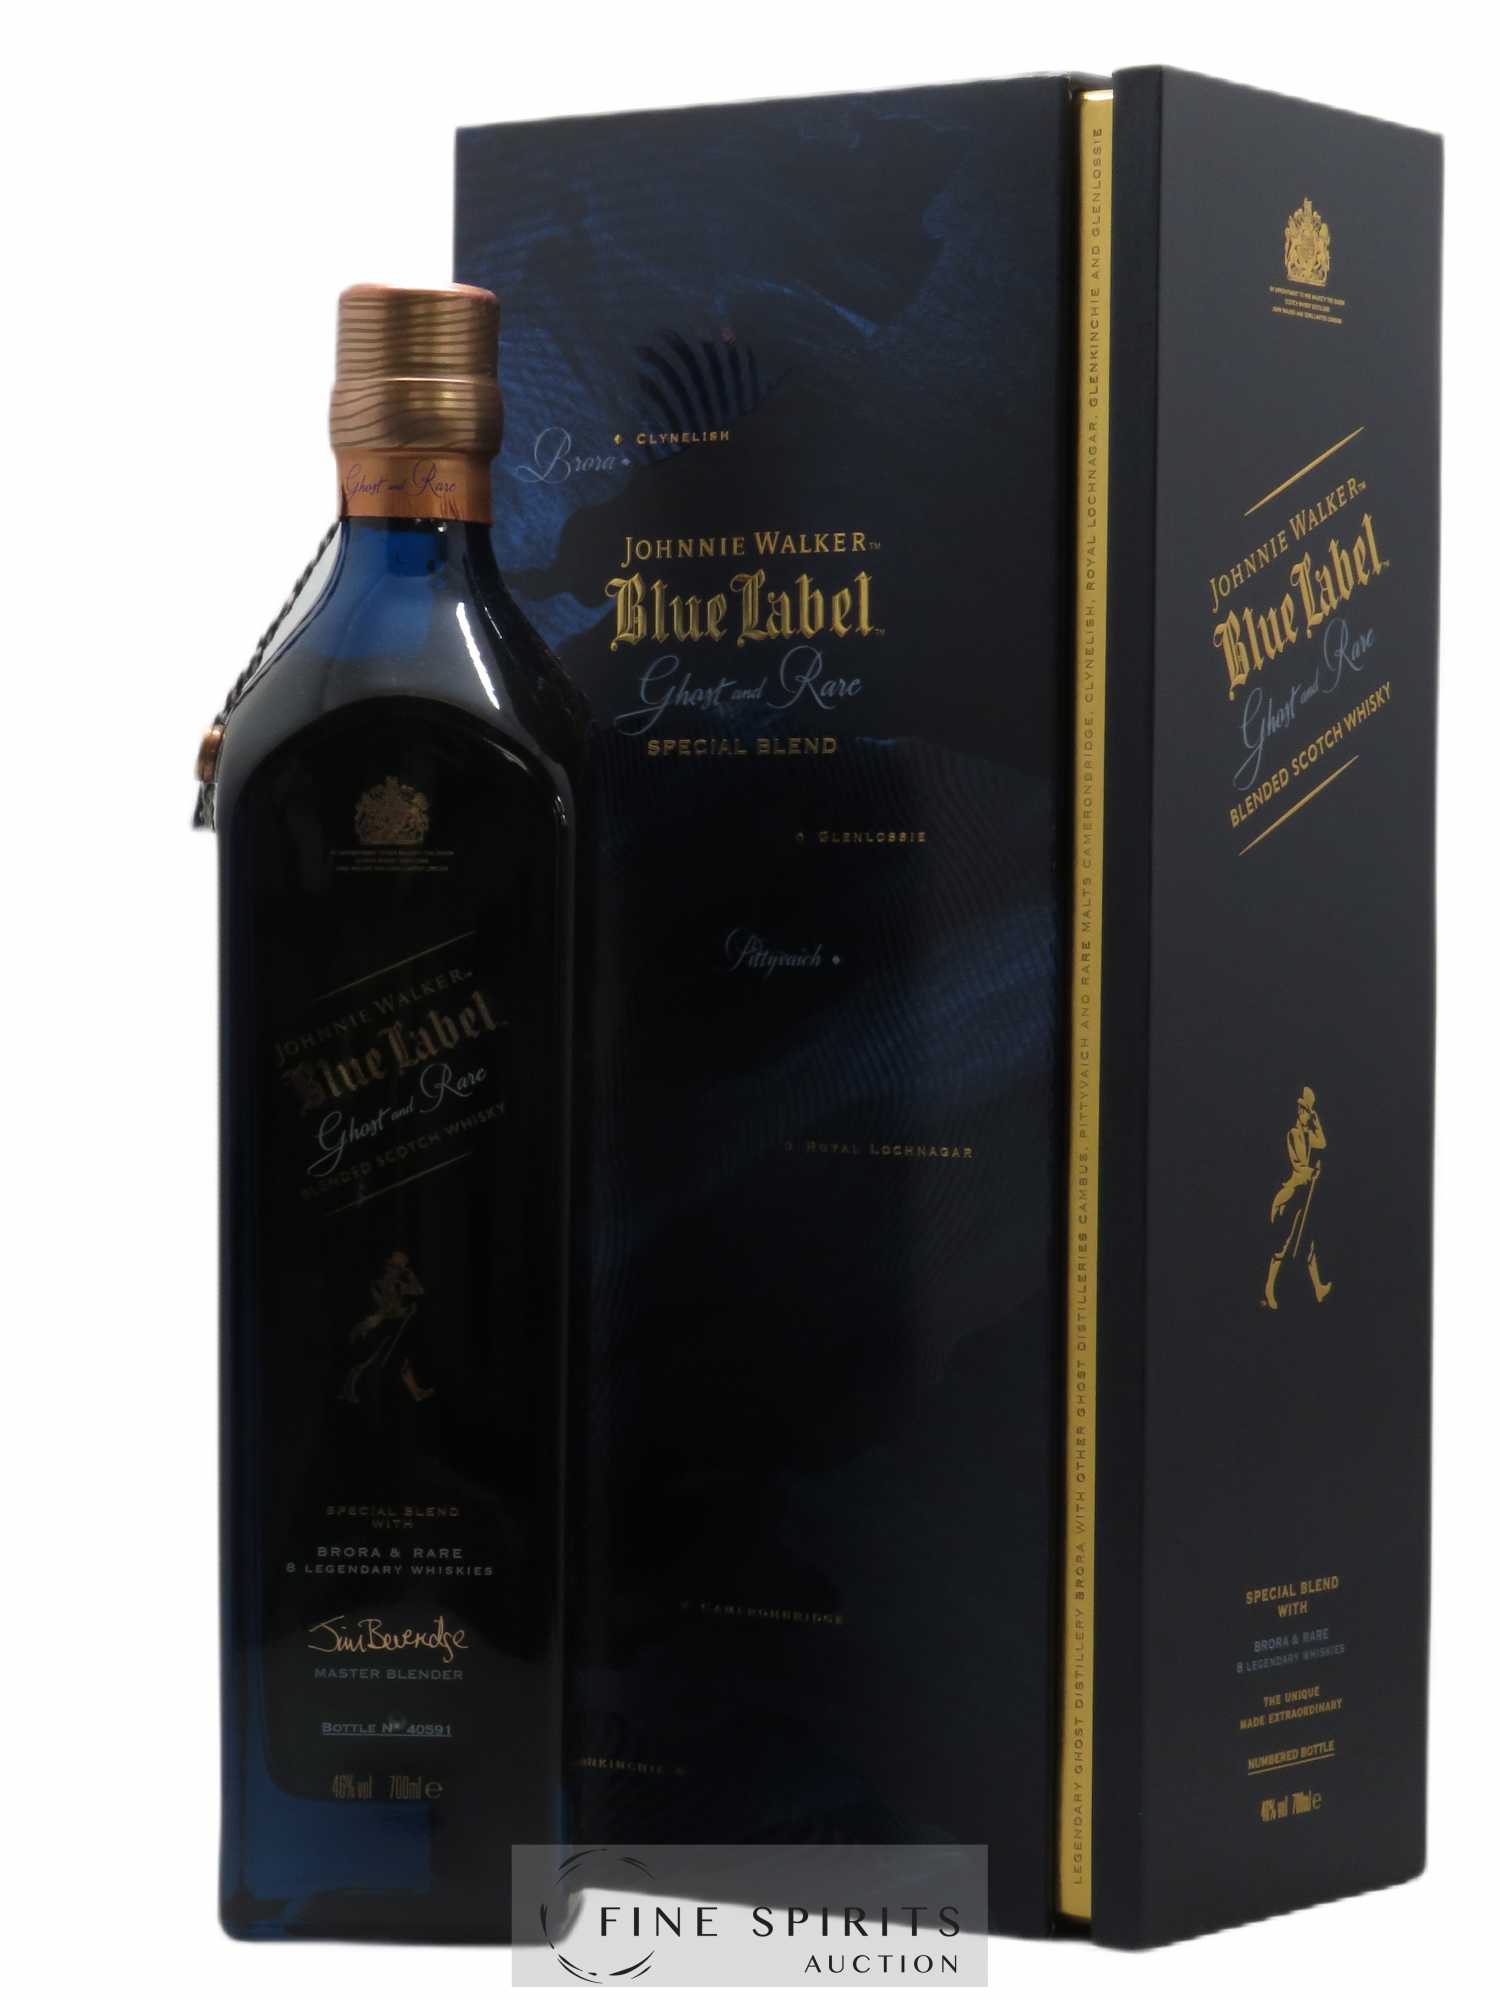 Johnnie Walker Of. Ghost and Rare Brora and 8 Rare Whiskies Blue Label - Special Blend (70 cl.) 